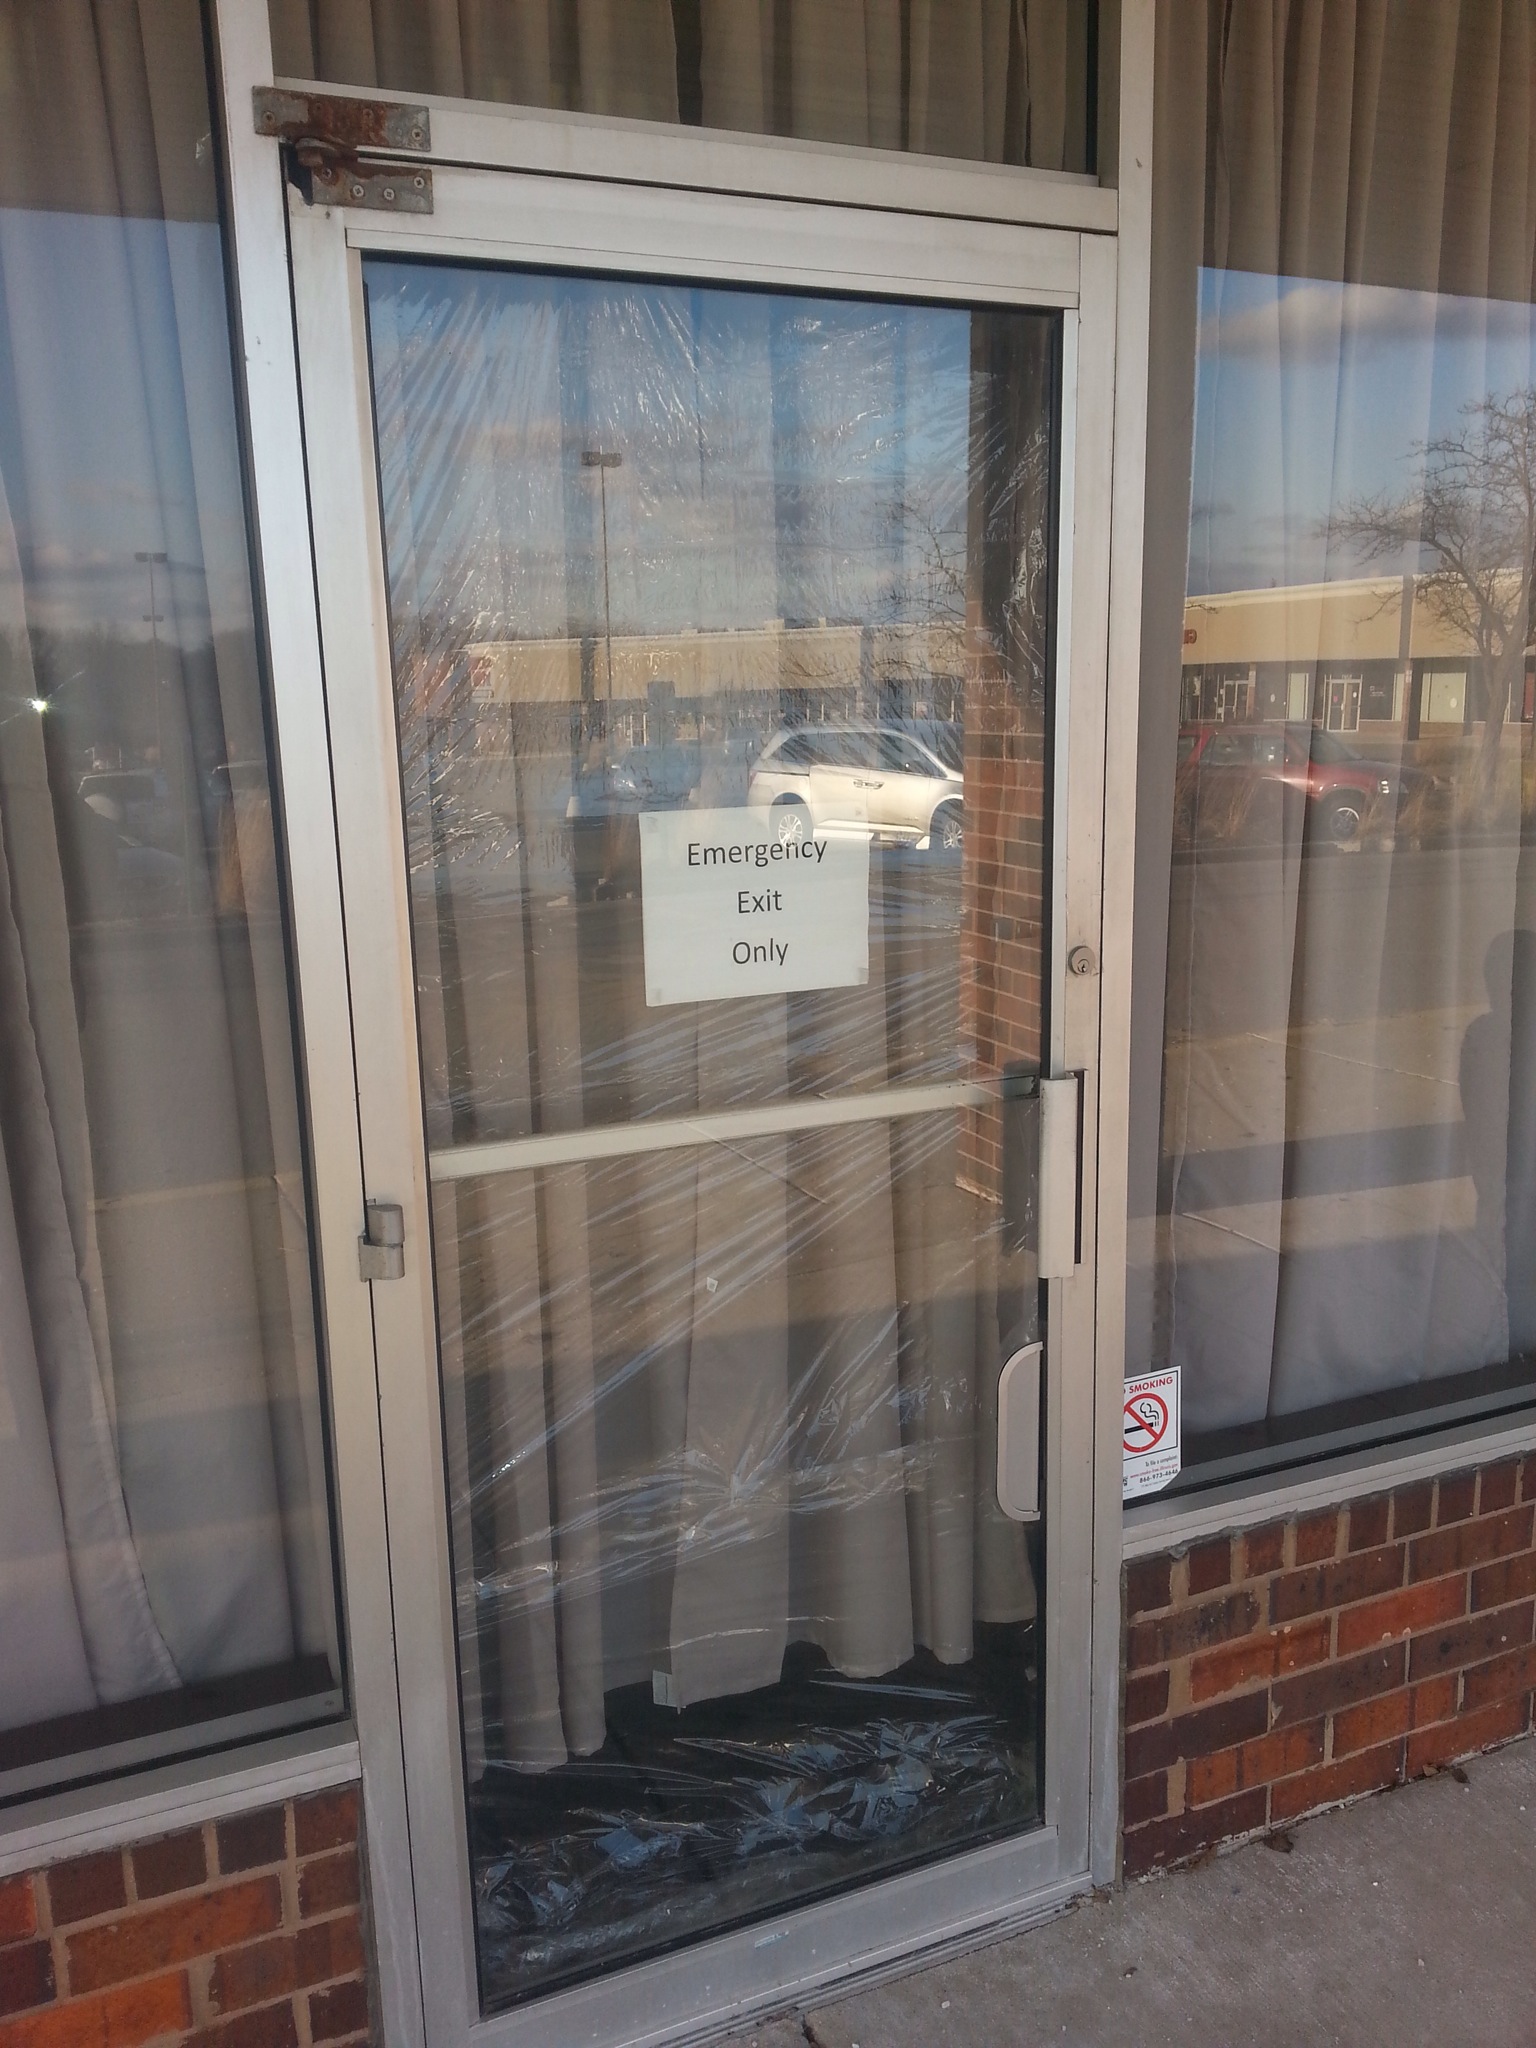 Plastic wrapped emergency exit